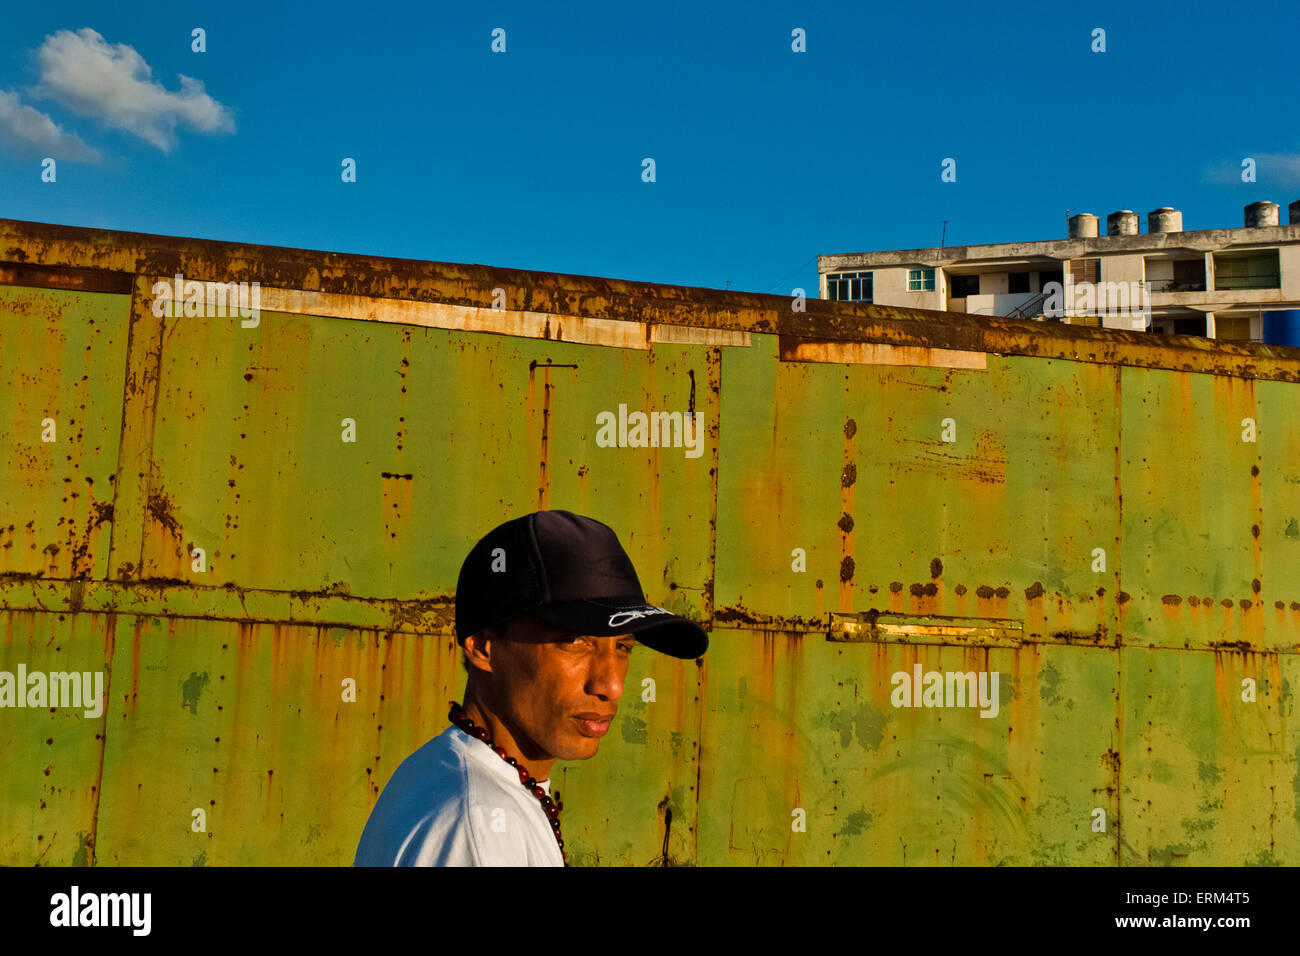 A young Cuban man, wearing a baseball cap, walks in front of a rusty container in Alamar, Havana, Cuba. Stock Photo